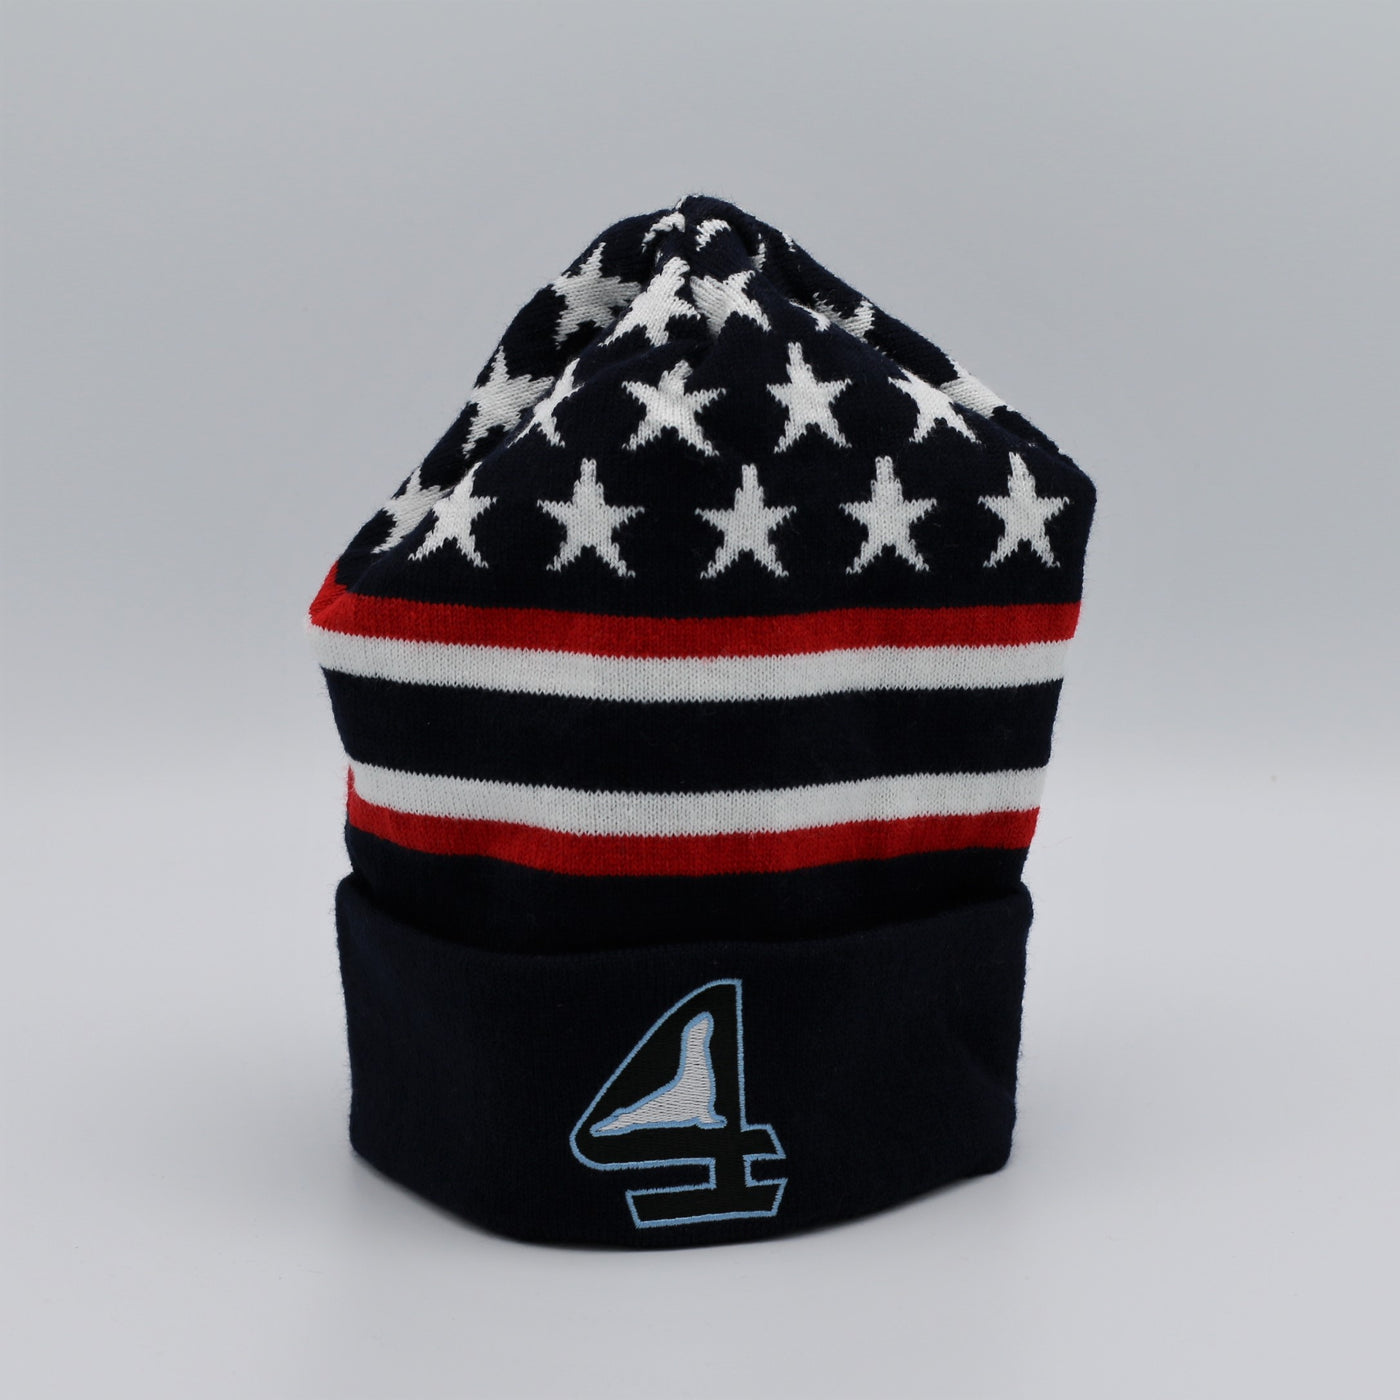 4 Freedom - Scully Cap